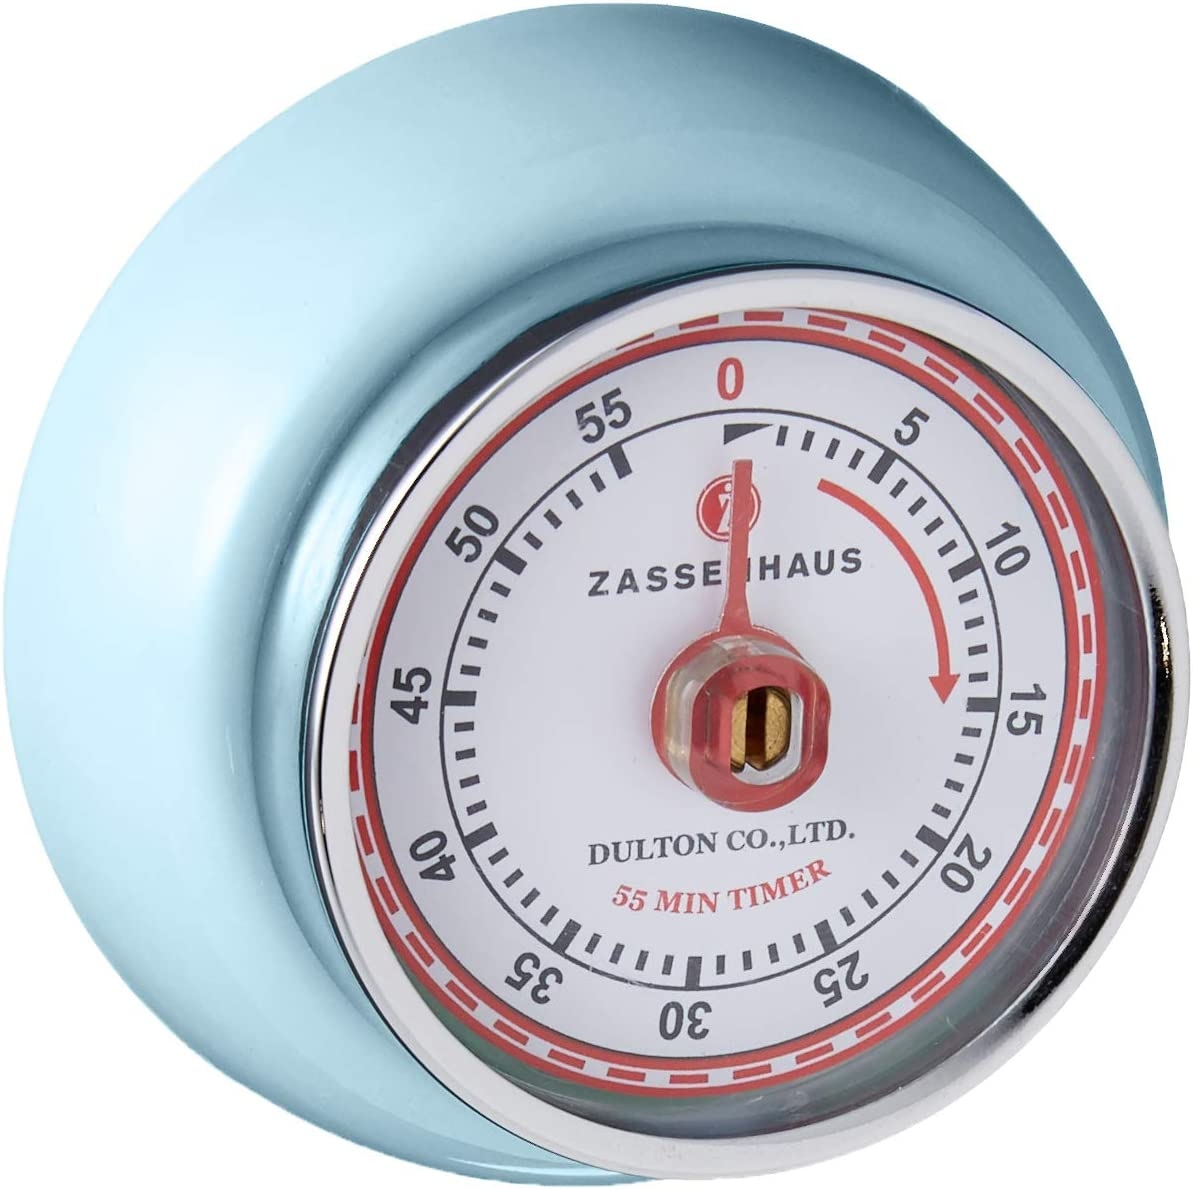 Zassenhaus Magnetic Retro Kitchen Timer, Classic Mechanical Cooking Timer (Mint Green) Import To Shop ×Product customization